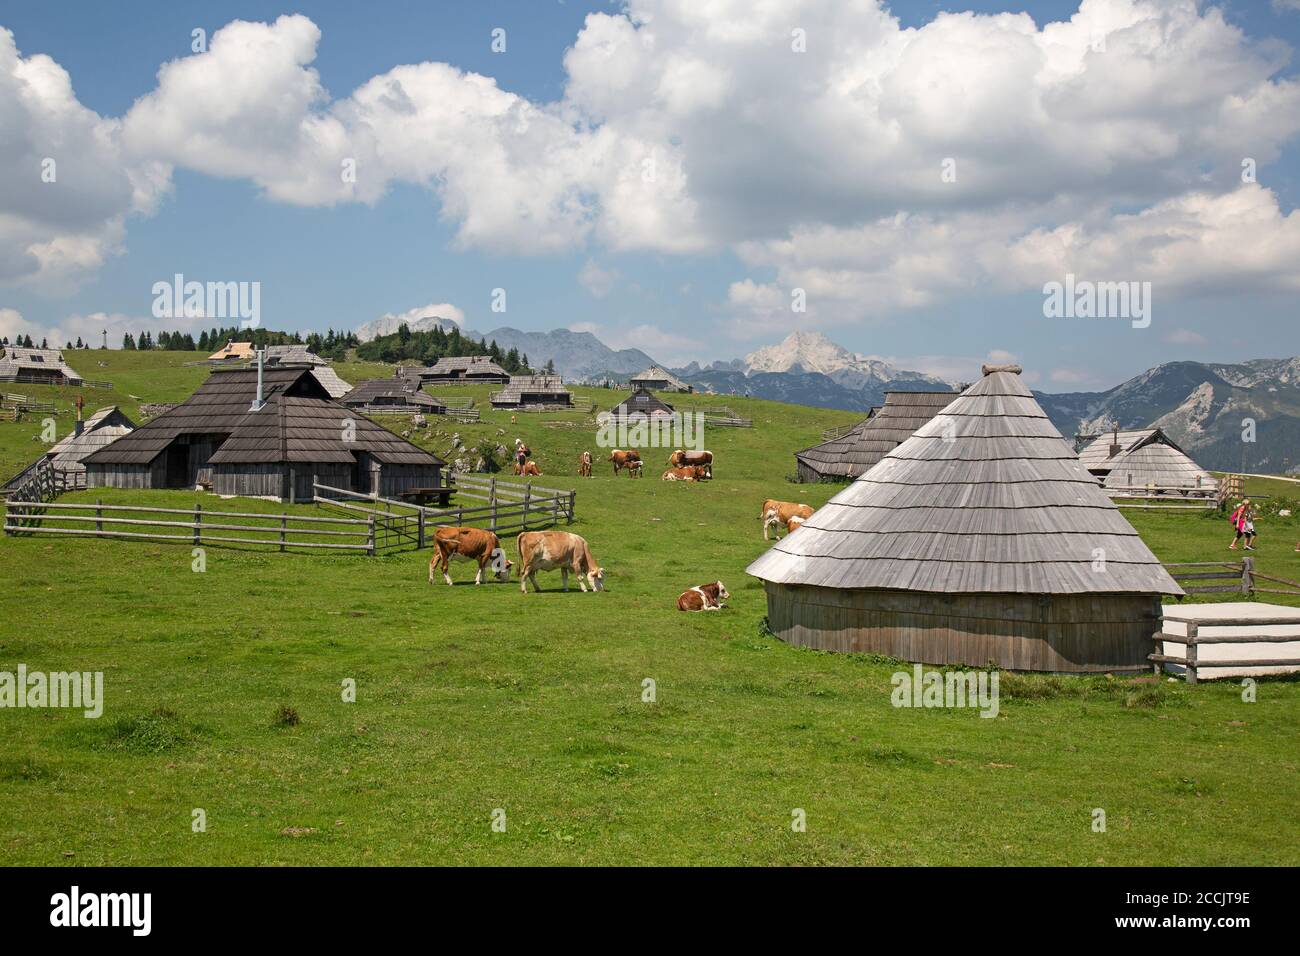 Cows grazing near traditional herdsman huts int he mountain settlement village of Velika Planina in Slovenia. Stock Photo